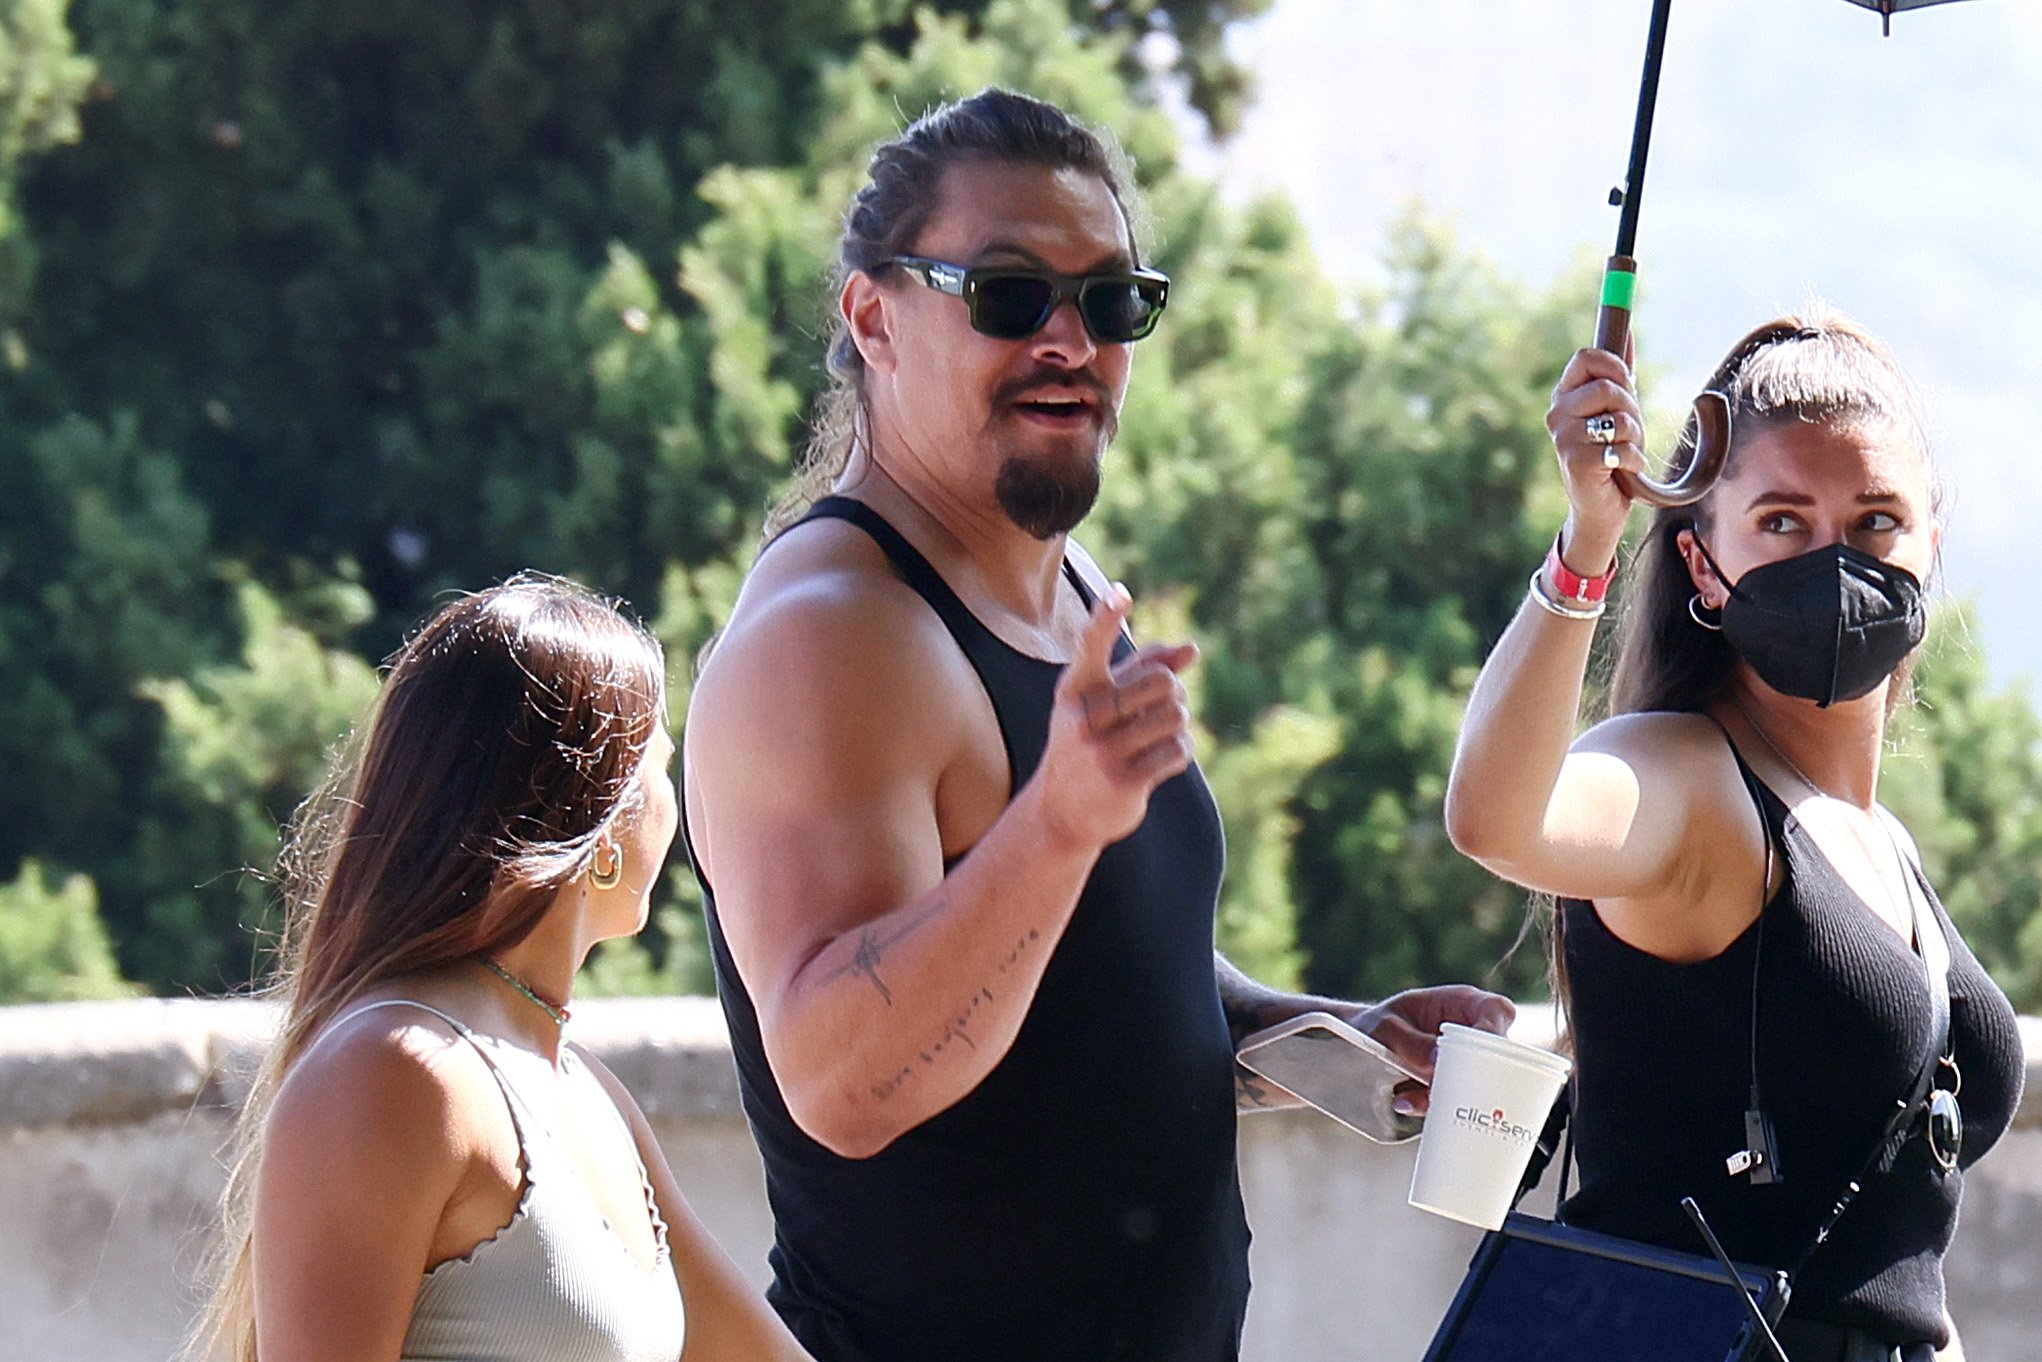 Jason Momoa is spotted filming 'Fast and Furious 10', which also stars Vin Diesel, in Rome